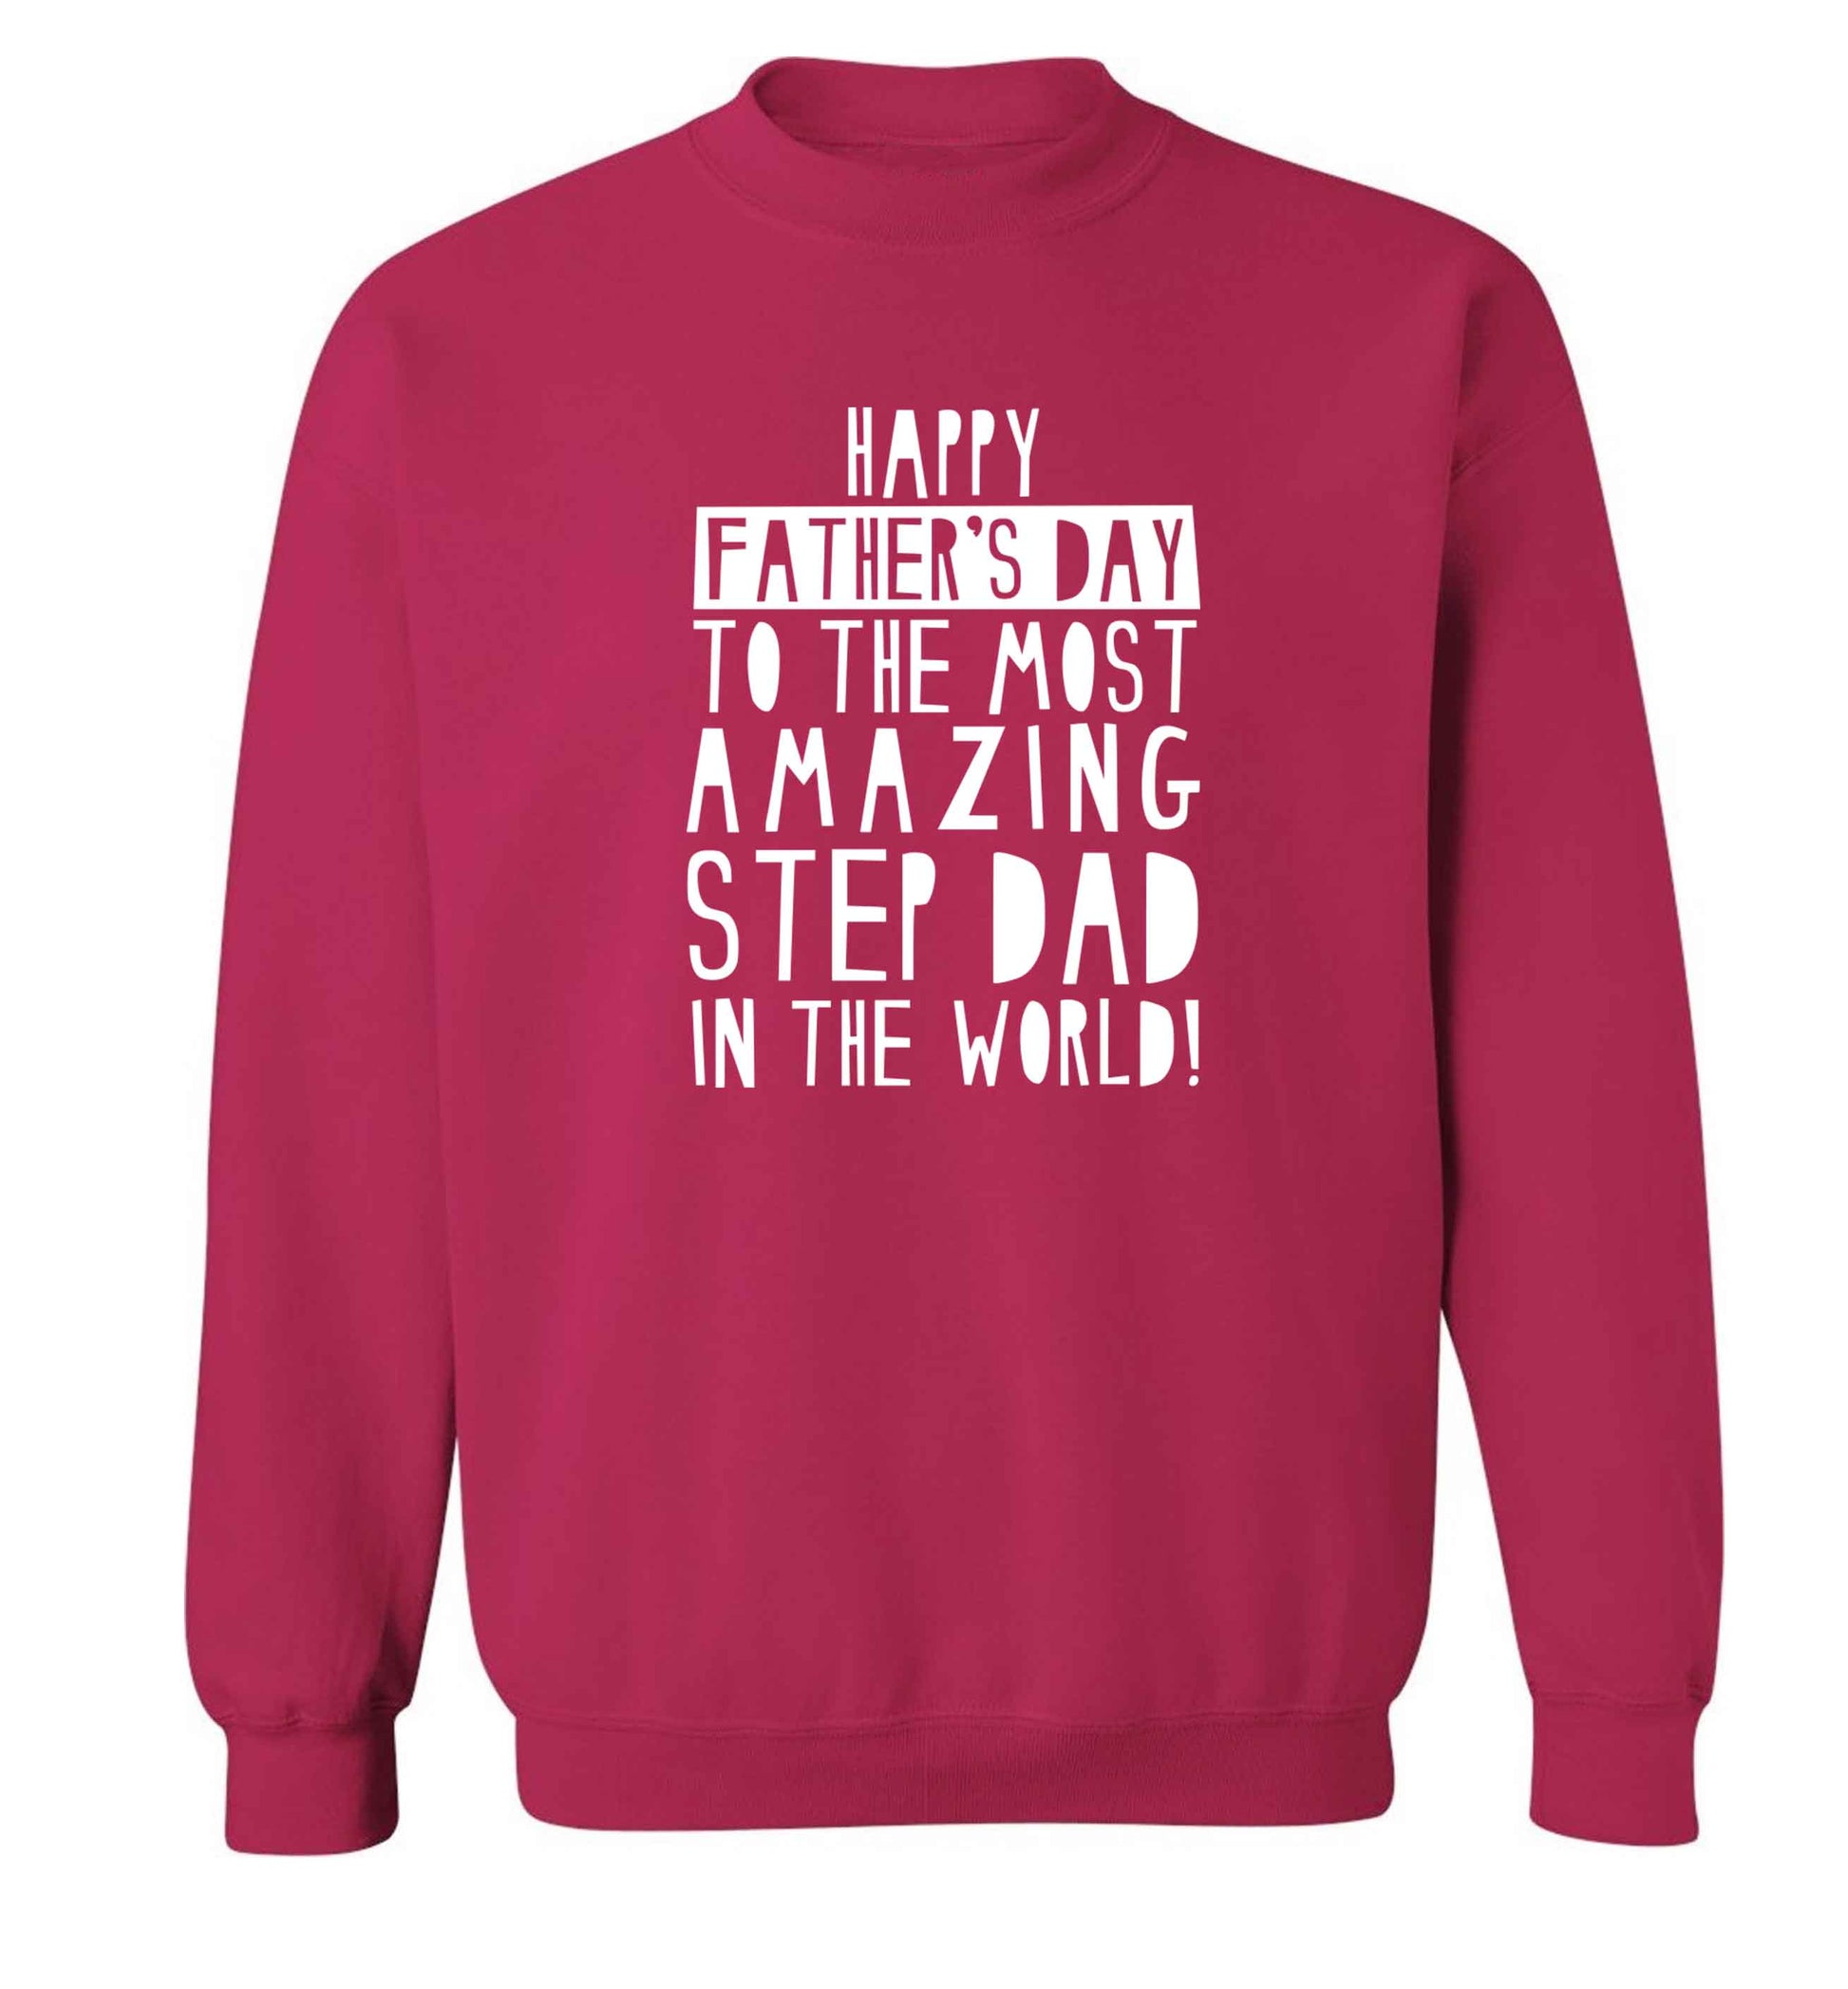 Happy Father's day to the best step dad in the world adult's unisex pink sweater 2XL